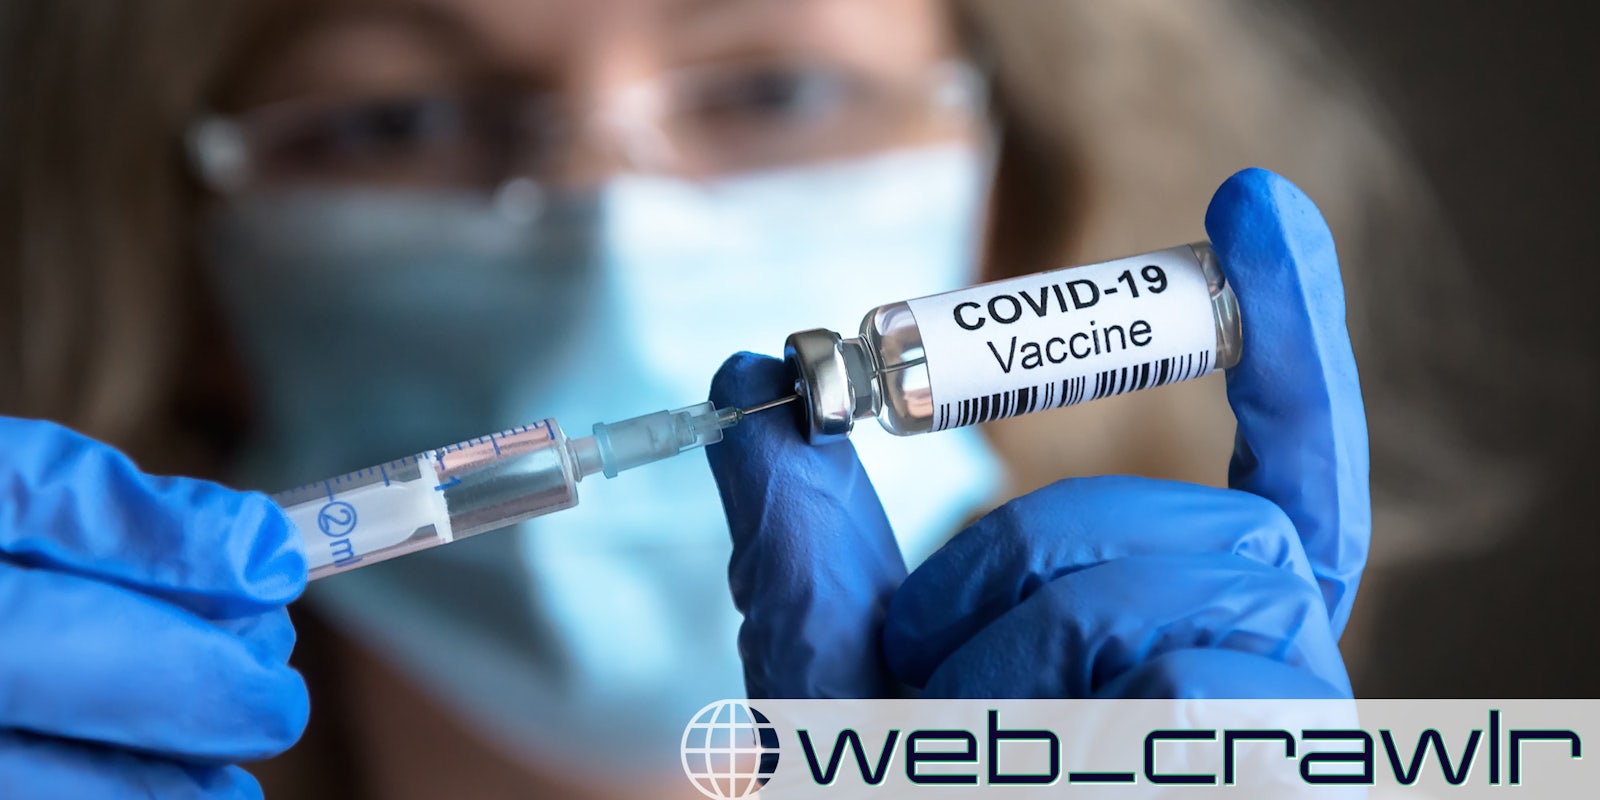 COVID-19 vaccine in researcher hands, female doctor's holds syringe and bottle with vaccine. The Daily Dot newsletter web_crawlr logo is in the bottom right corner.